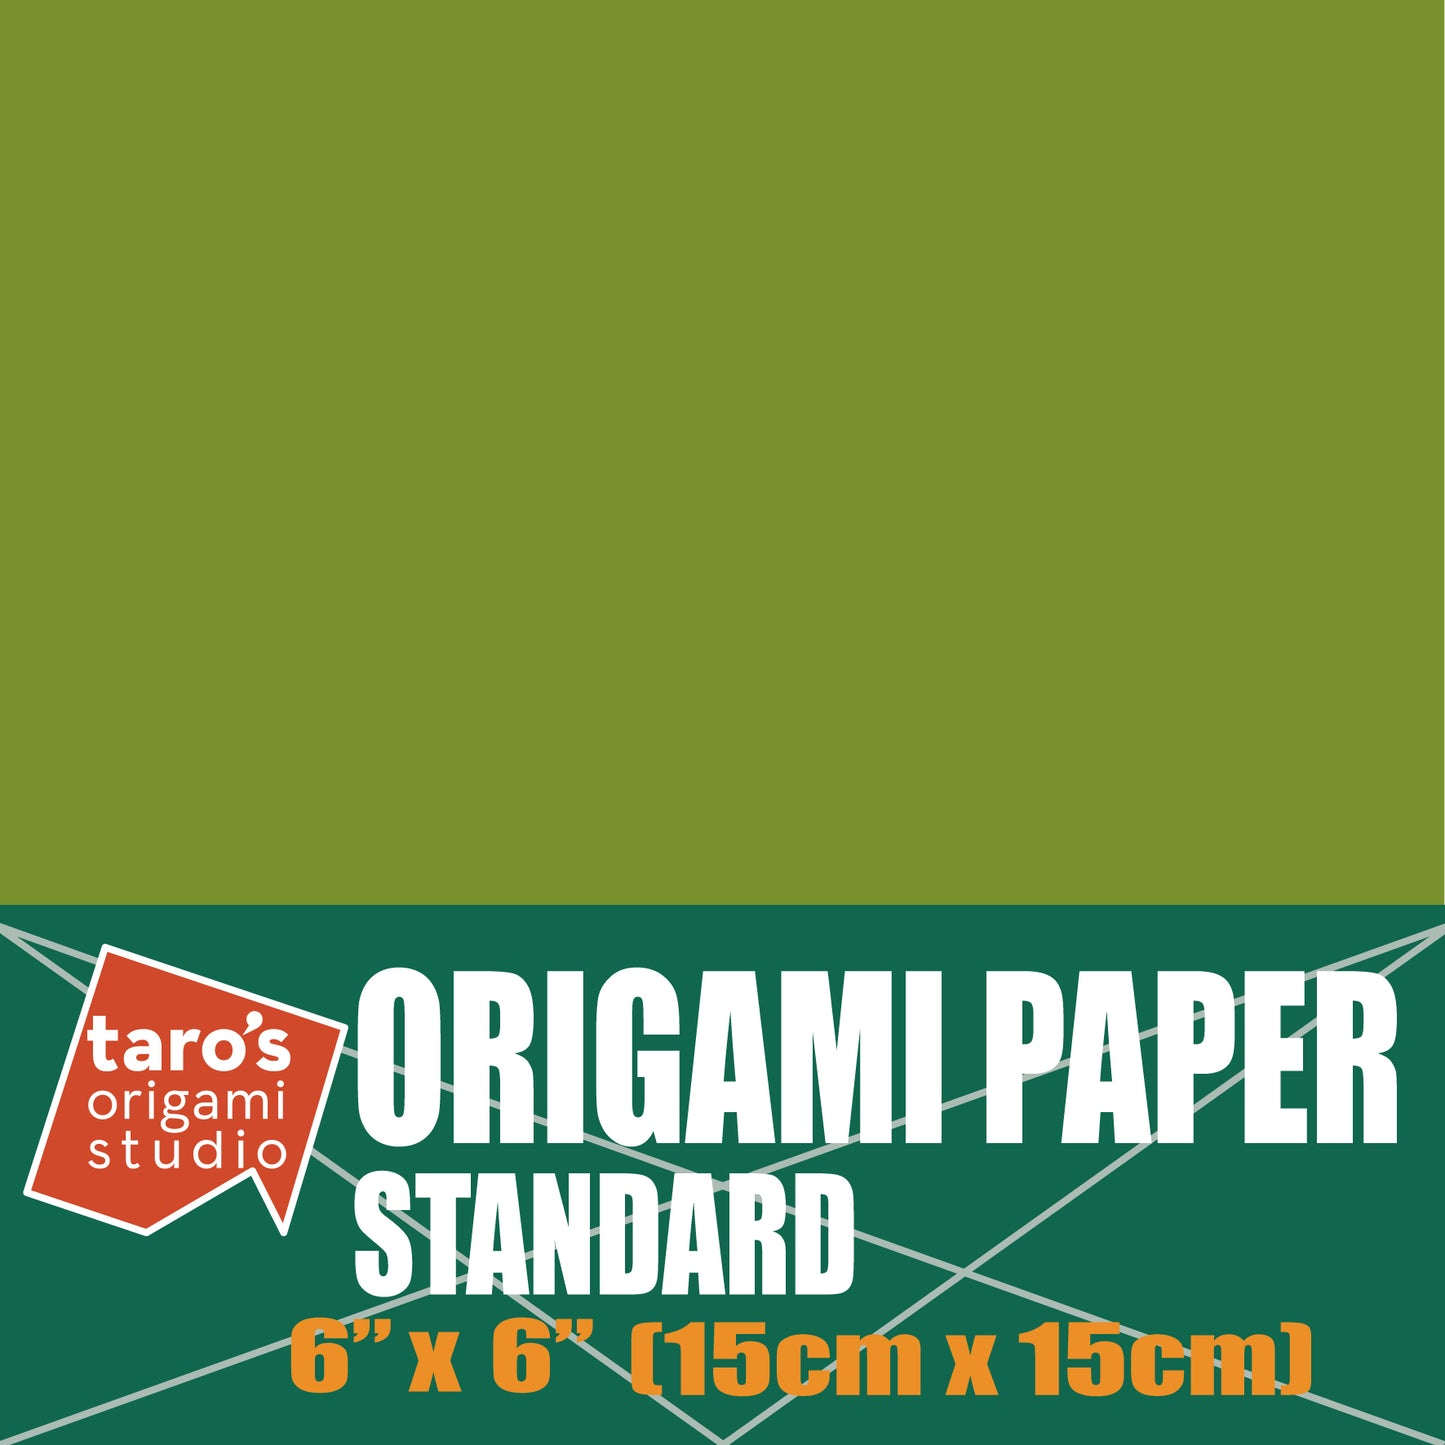 Standard 6 Inch One Sided Single Color (Moss Green) 50 Sheets (All Same Color) Square Easy Fold Premium Japanese Paper for Beginner (Made in Japan)